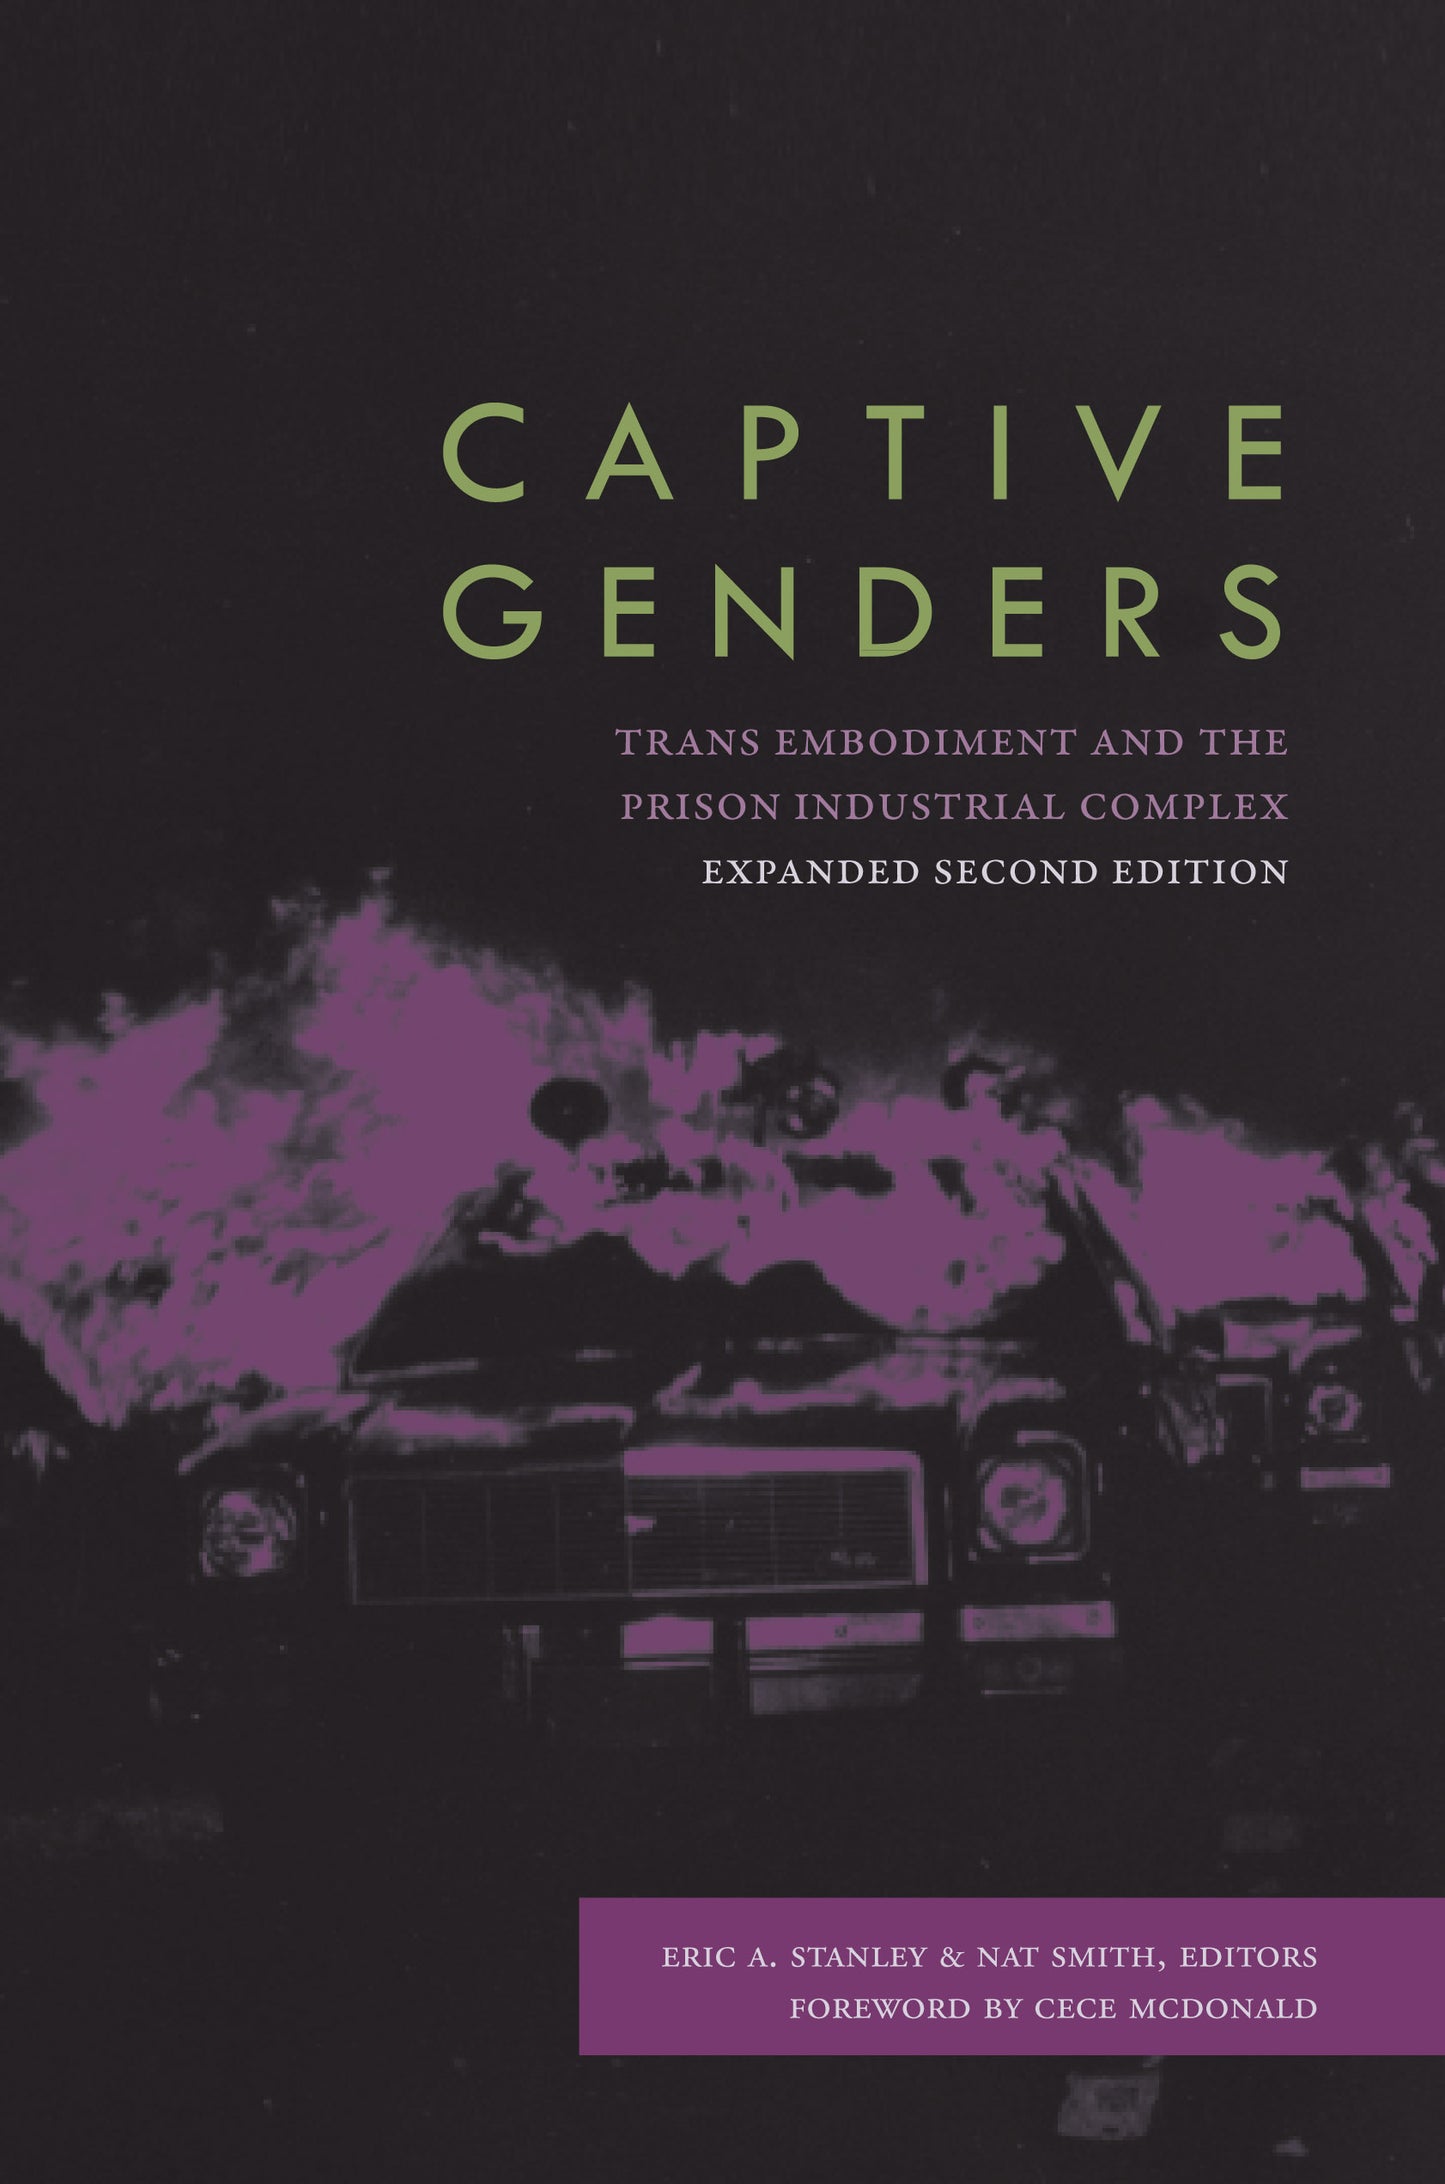 Captive Genders (2nd ed.) // Trans Embodiment & the Prison Industrial Complex